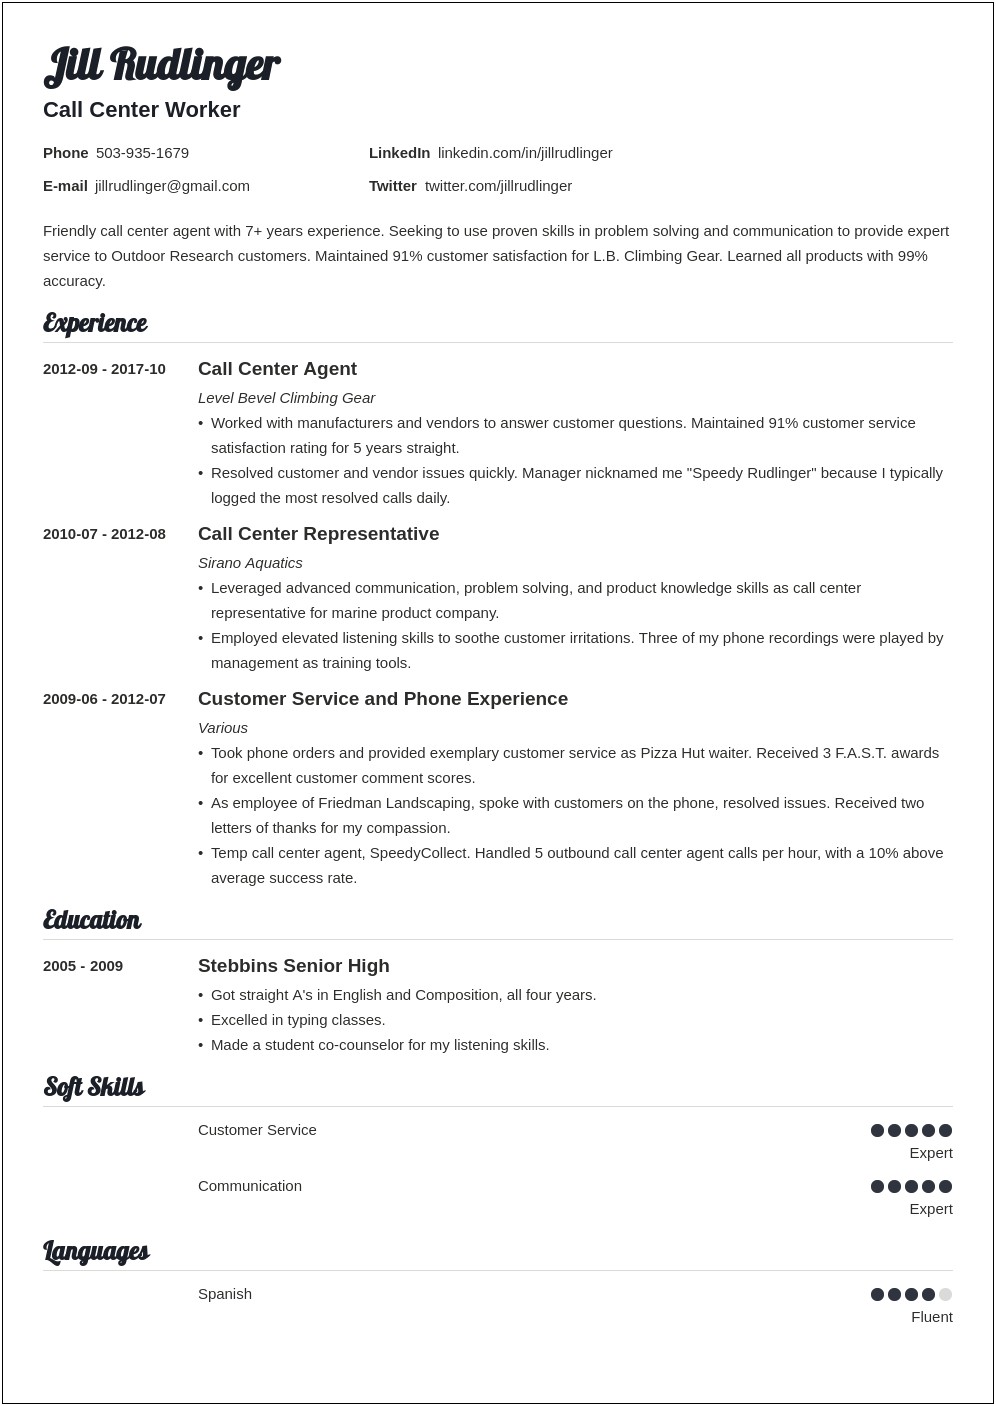 Call Center Agent Resume With No Experience